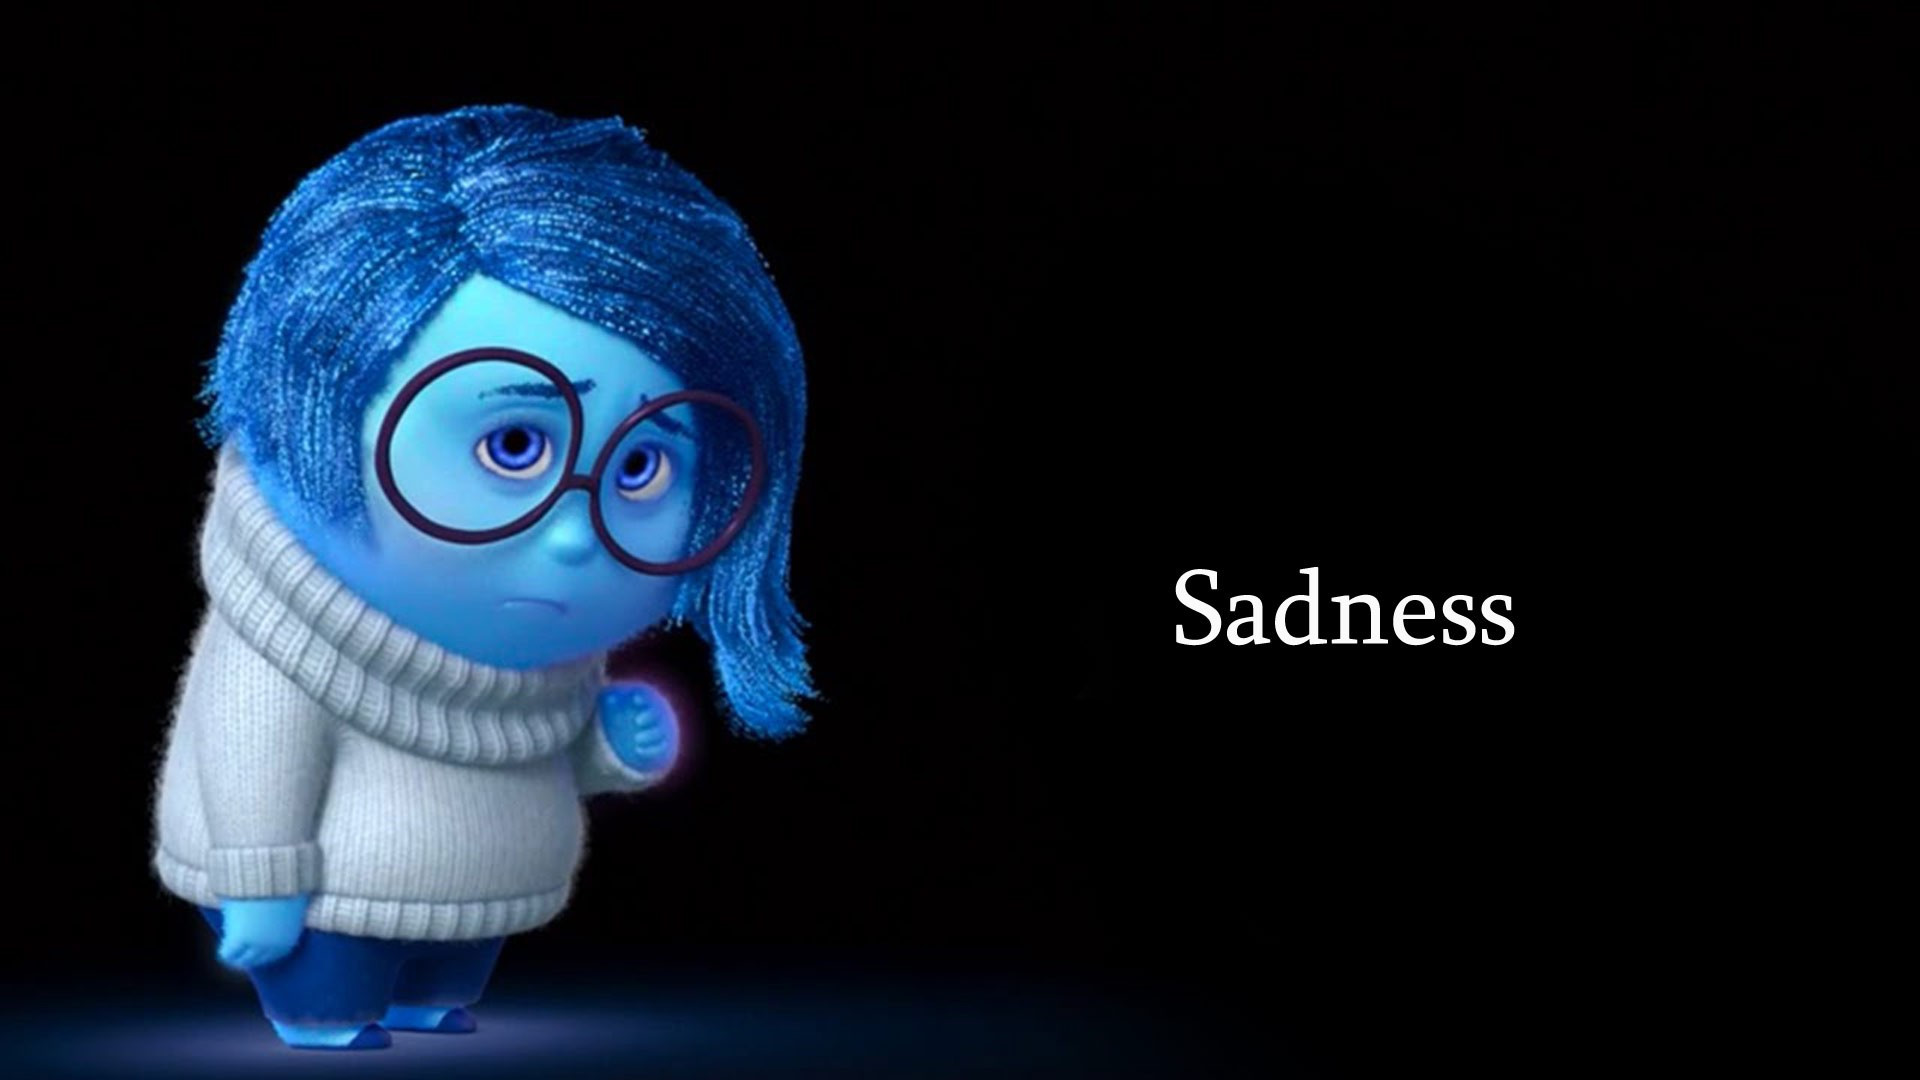 Sadness Quotes Inside Out
 Inside Out Sadness Quotes QuotesGram